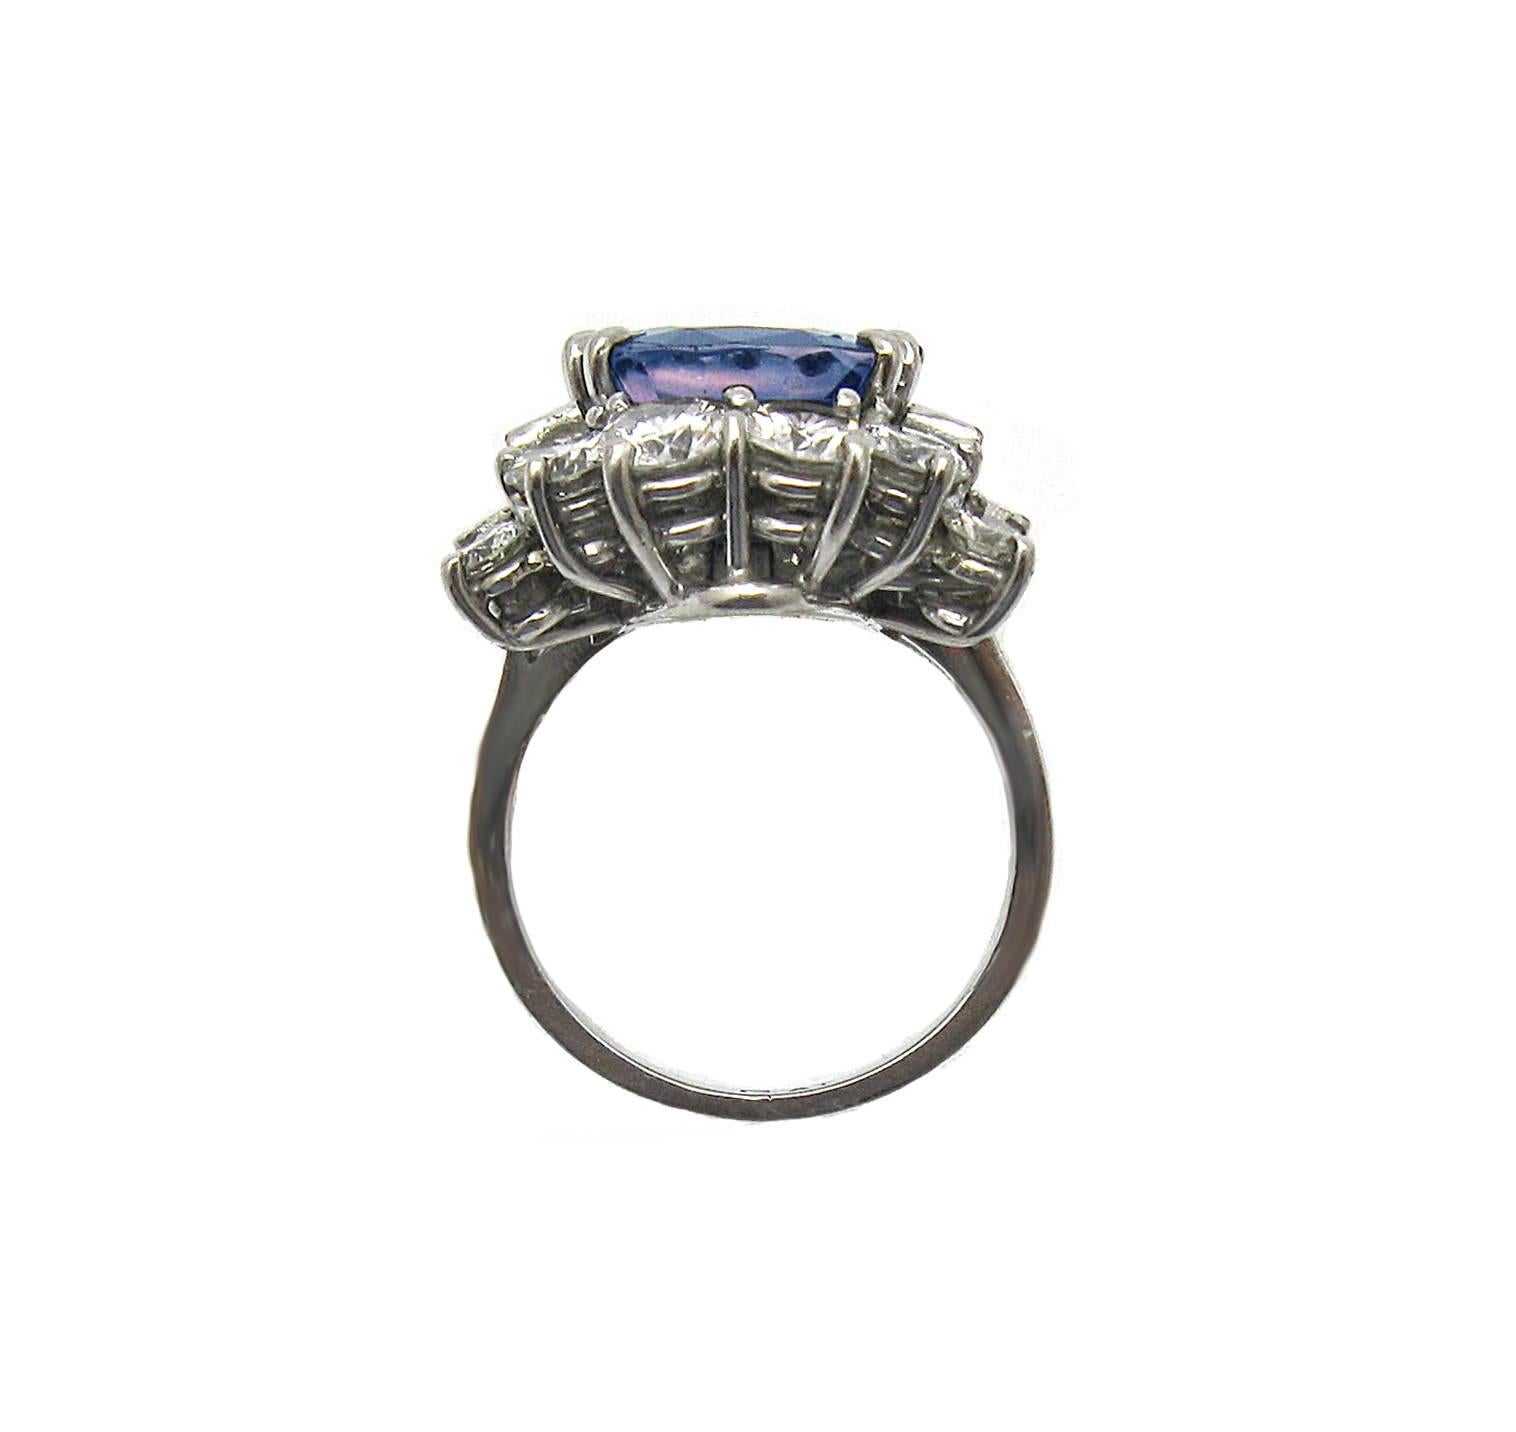 This creative sapphire and diamond piece will serve you two ways: as a ring or a pendant! Featuring a 6.59ct cushion cut Sapphire and framed by 16 baguette and round diamonds totaling over 3.20ct, this elegant multi purpose jewel will be a welcome